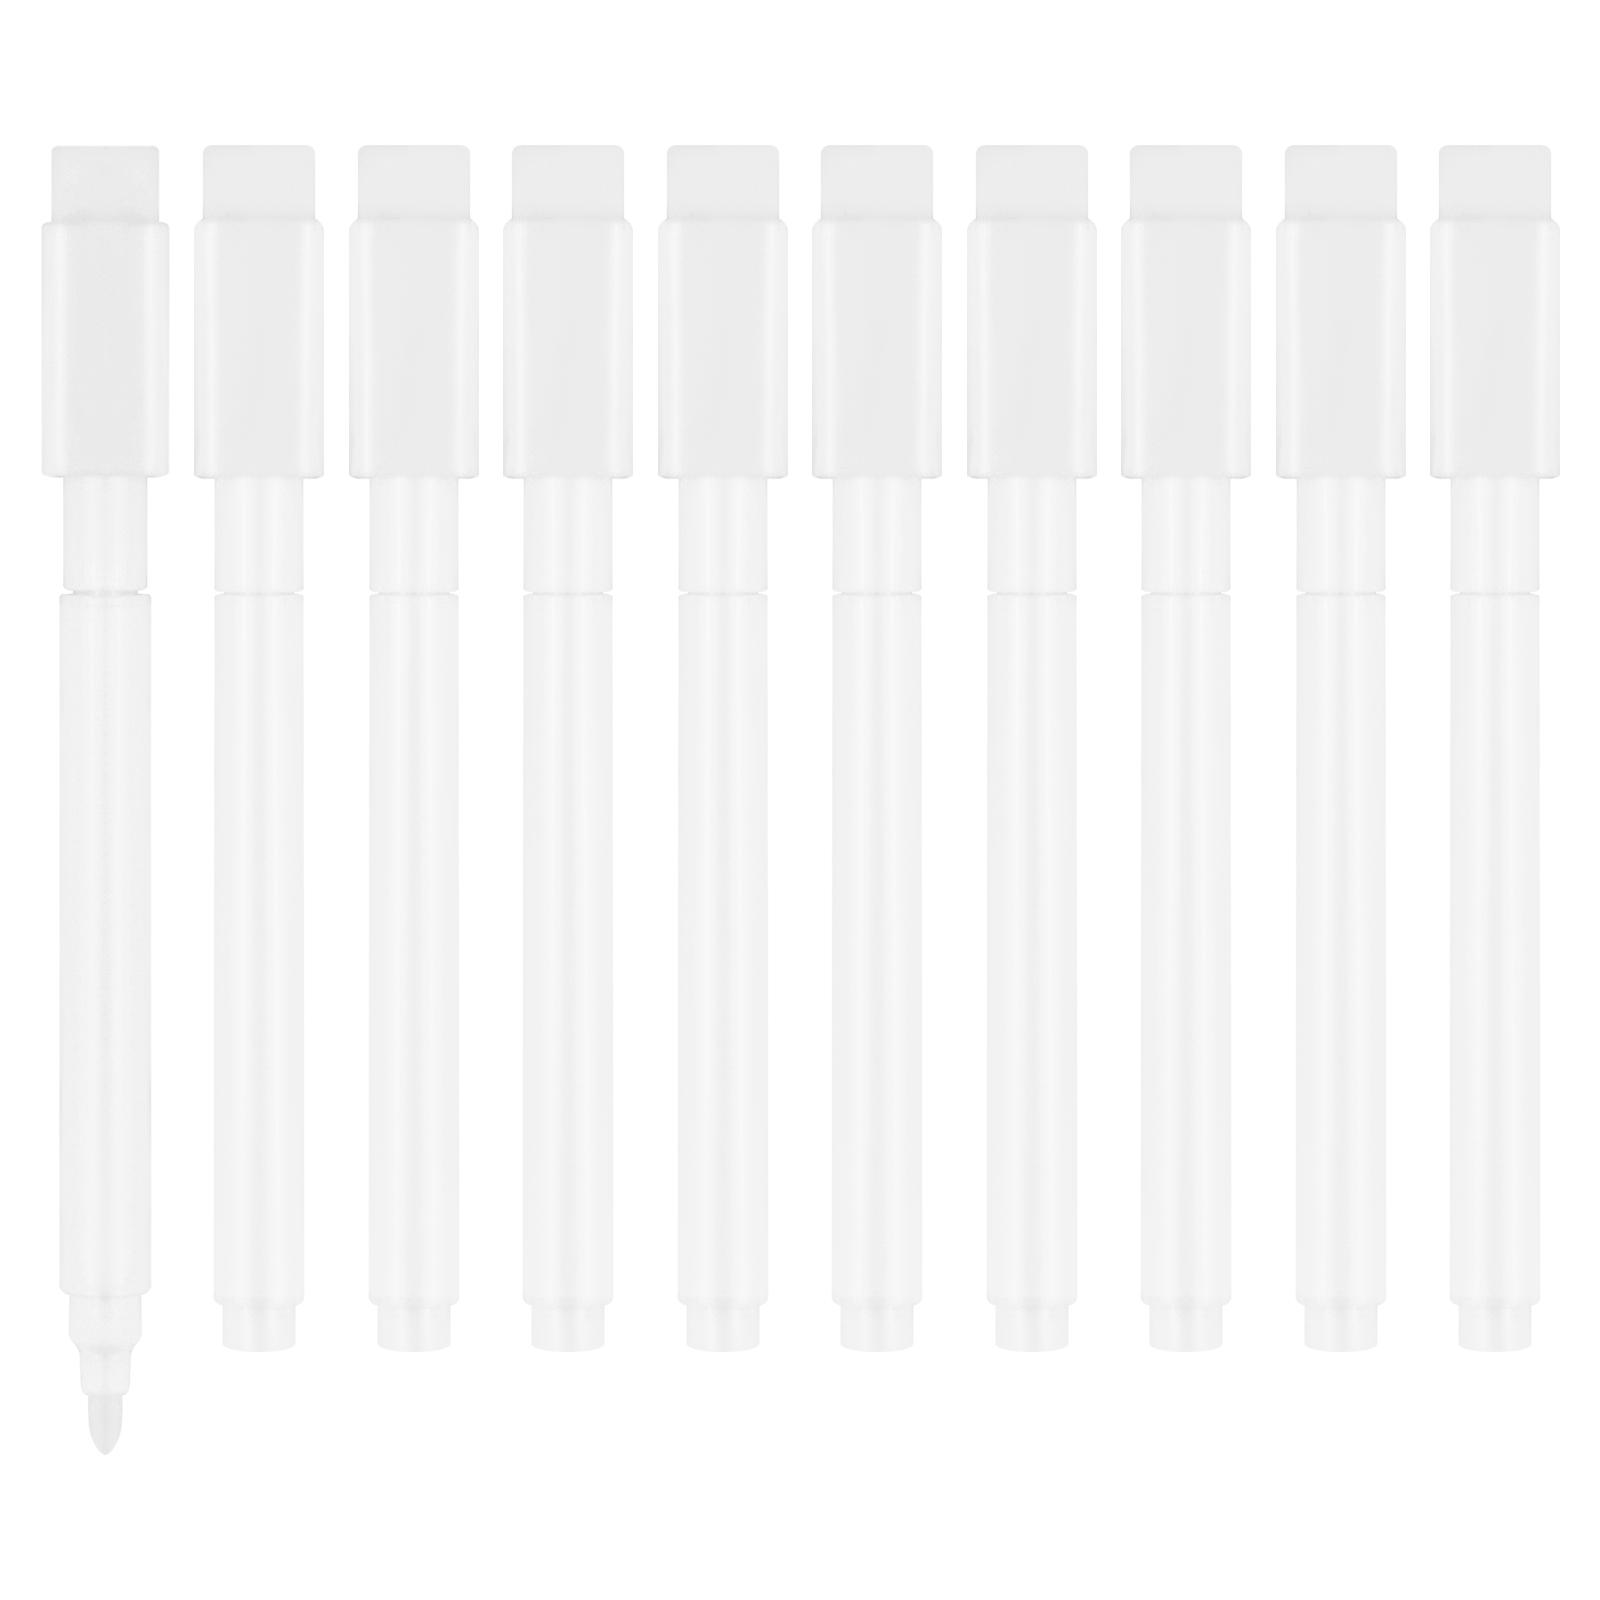 GOTIDEAL White Liquid Chalk Markers, 12 Pack Chalkboard Markers